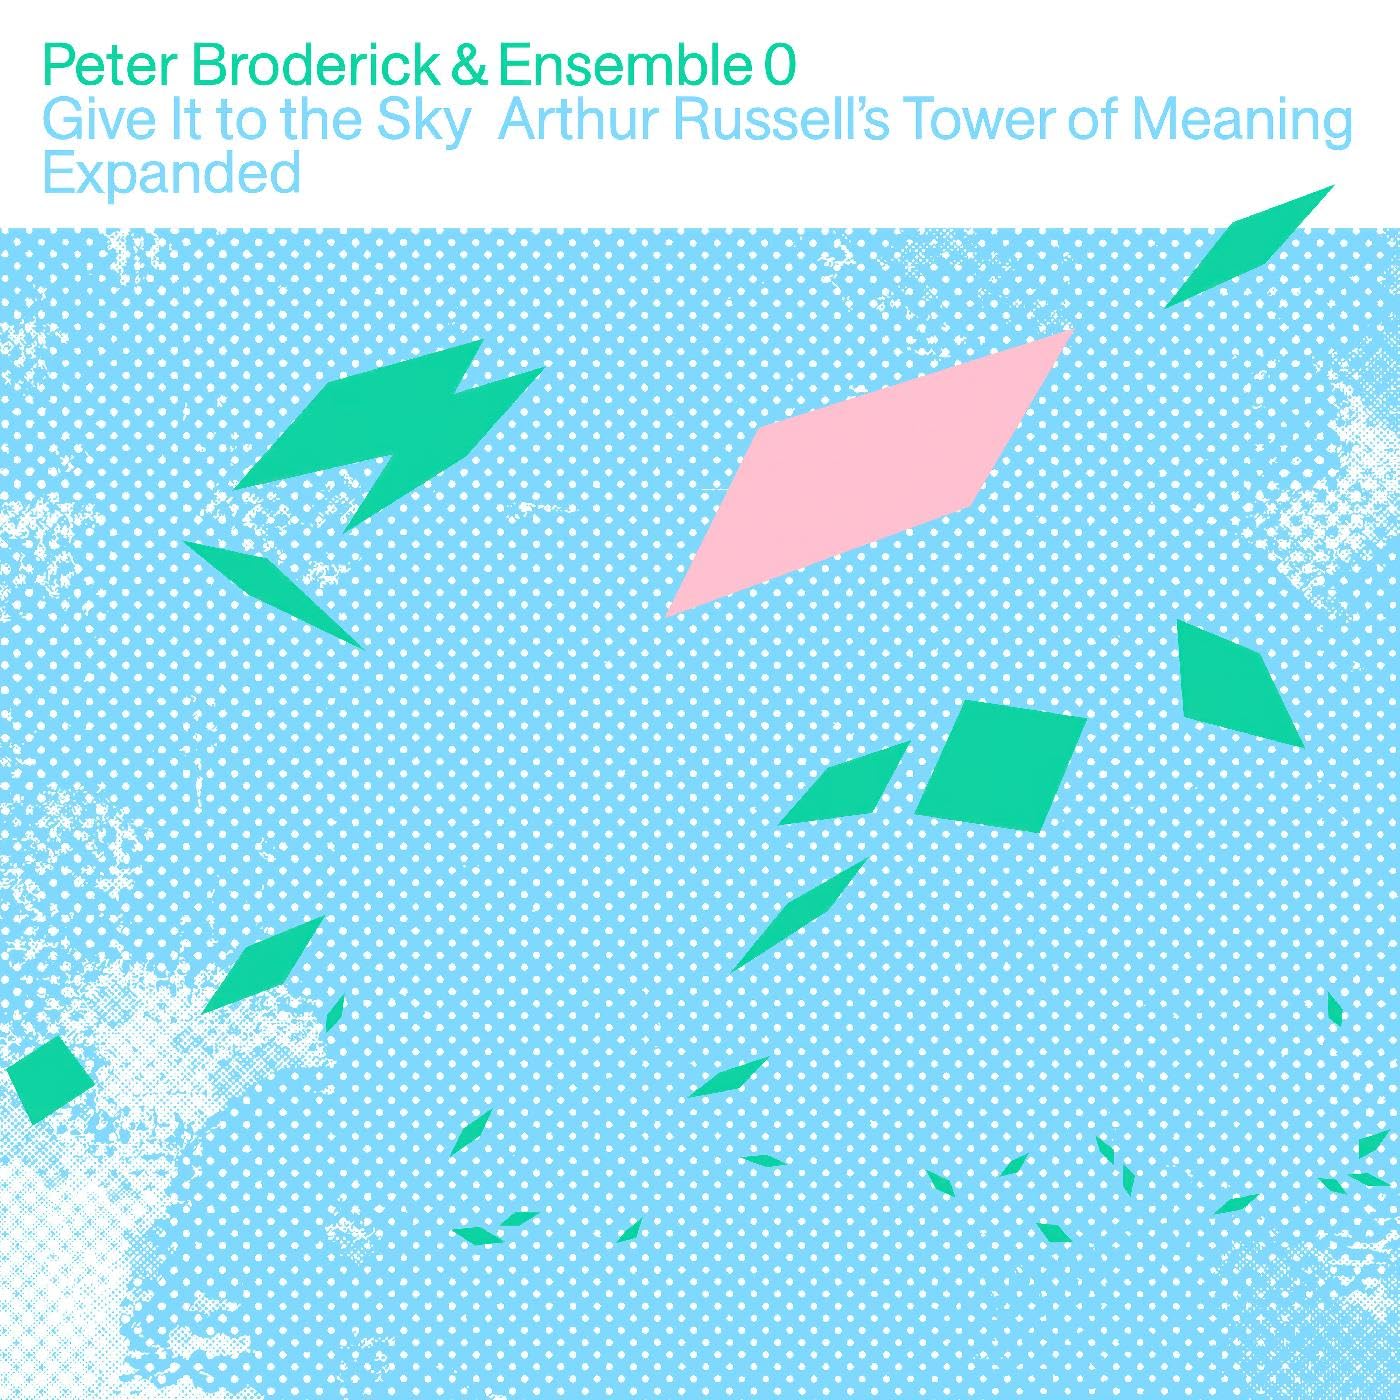 Vinile Peter Broderick & Ensemble 0 - Give It To The Sky: Arthur Russells Tower Of Meaning Expanded (Clear Vinyl) NUOVO SIGILLATO, EDIZIONE DEL 04/09/2023 SUBITO DISPONIBILE